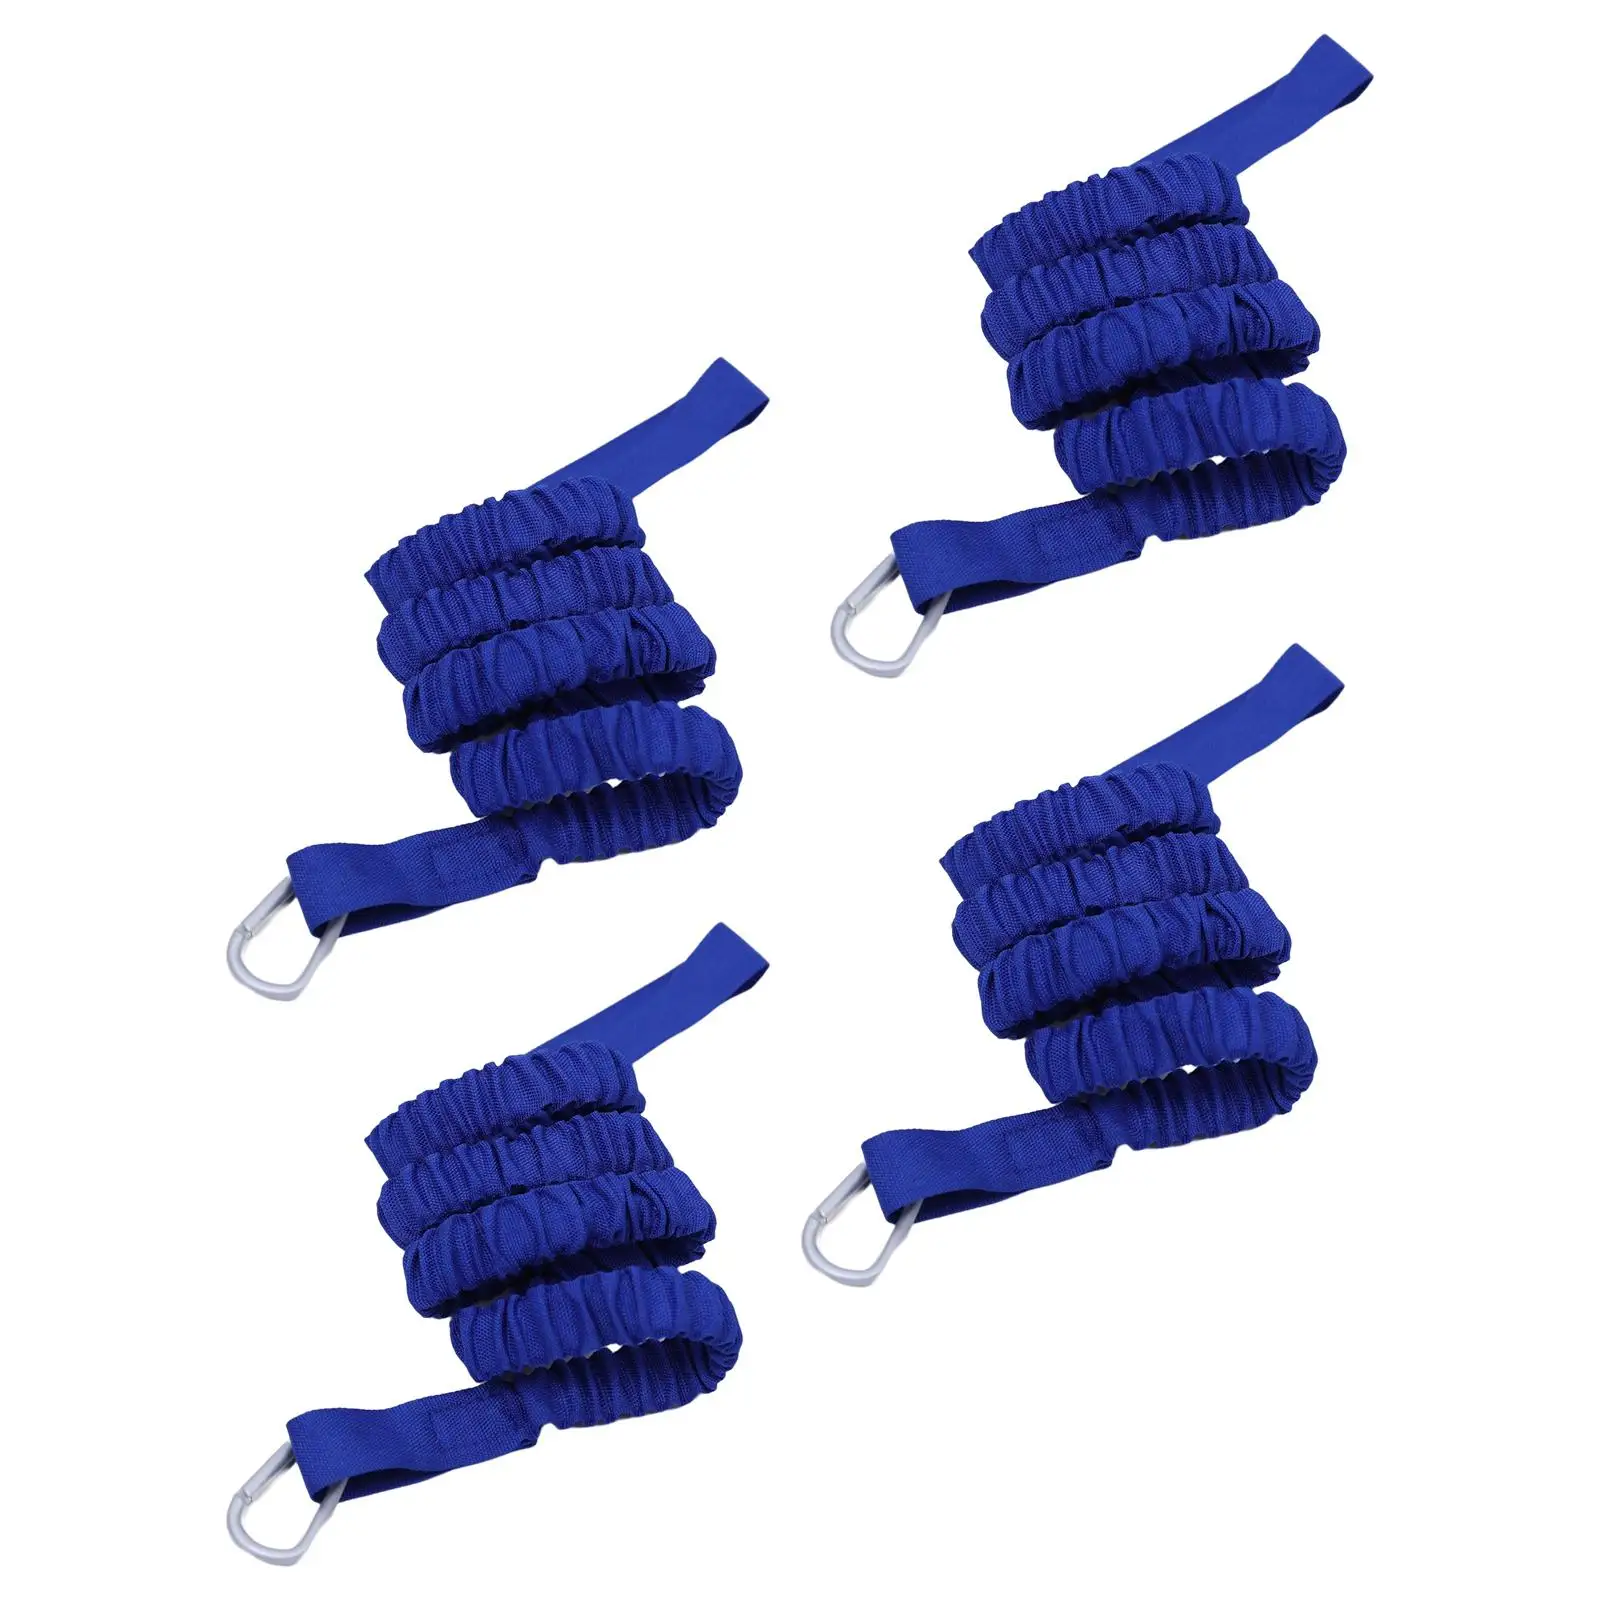 2cm Width Kayak Paddle Leash Stretchable Coiled Easy Use Durable Accessories